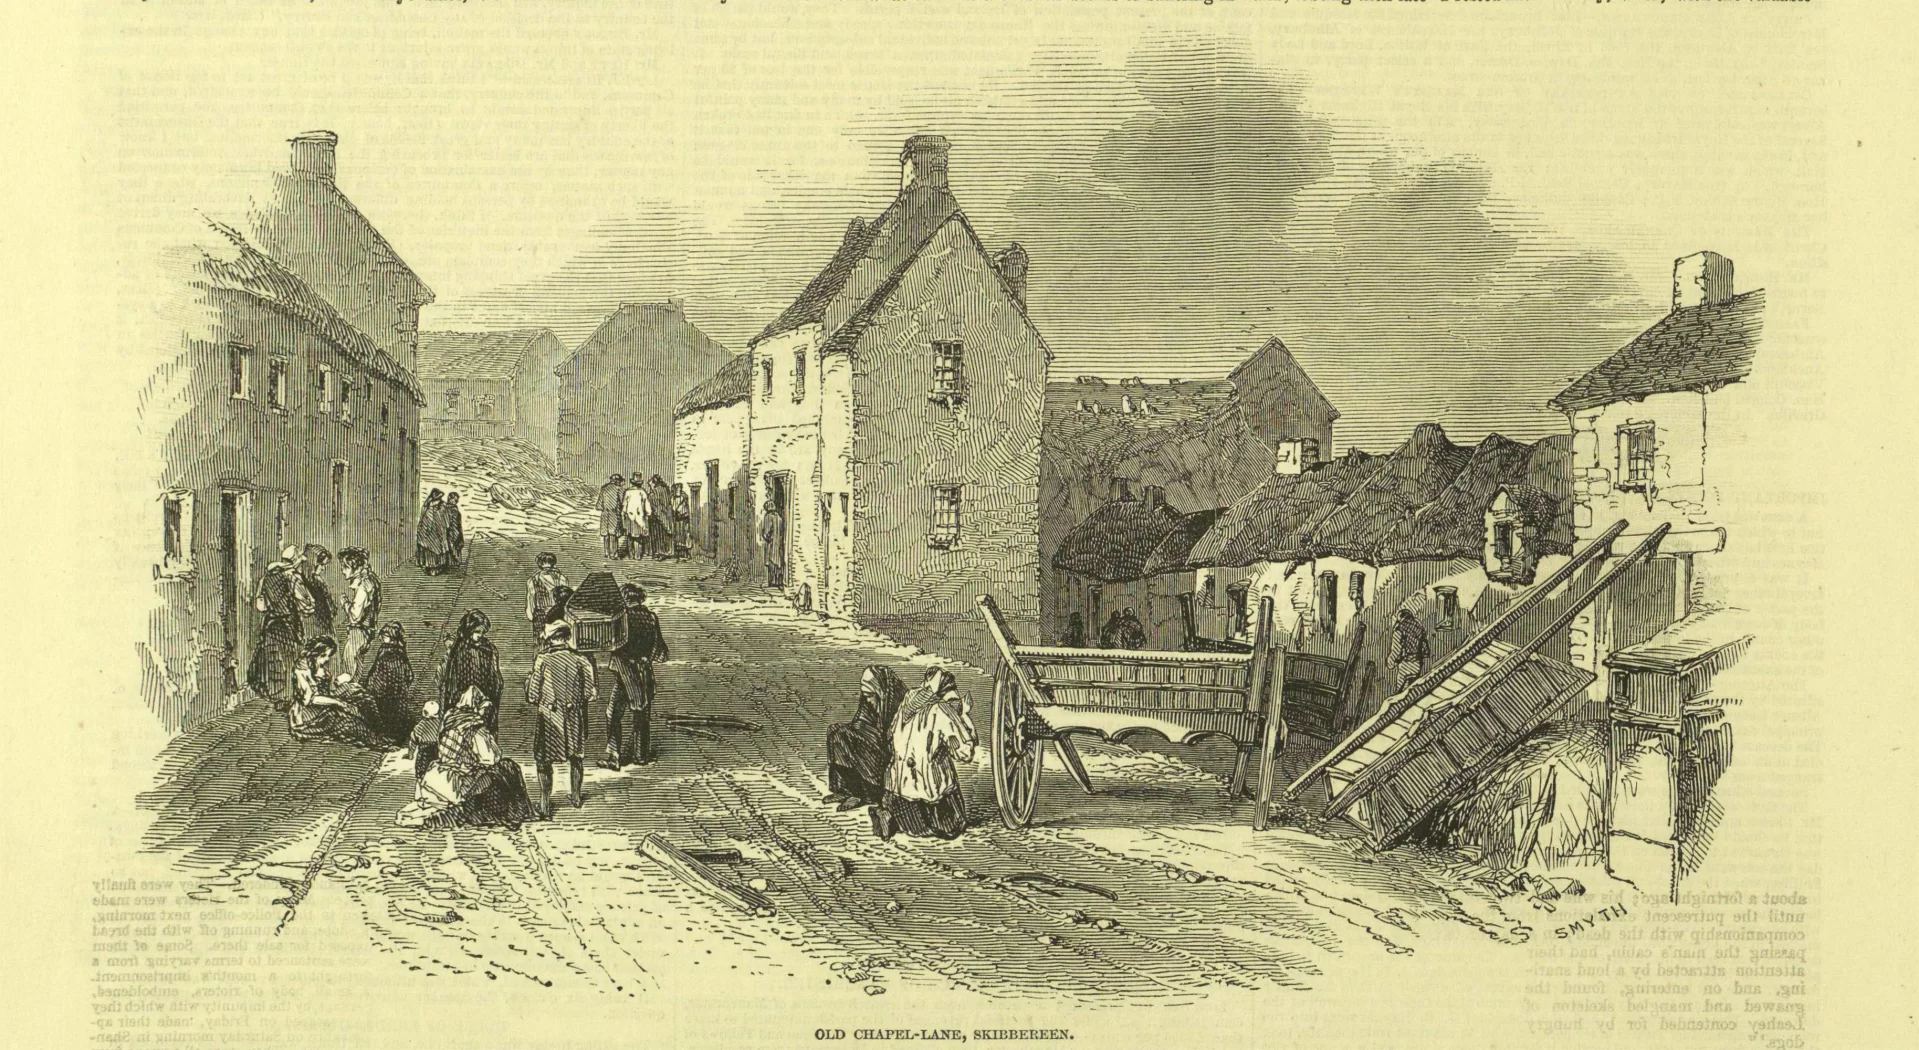 The illustration was published in The Illustrated London News during the Great Famine in Ireland in Feb. 13, 1847, with the caption “Old Chapel-Lane, Skibbereen,” a town in County Cork on the southern coast of Ireland. The writer of the accompanying story, James Mohony, said that “neither pen nor pencil ever could portrait the misery and horror, at this moment, to be witnessed in Skibbereen.” (Photo courtesy of Anelise Hanson Shrout)